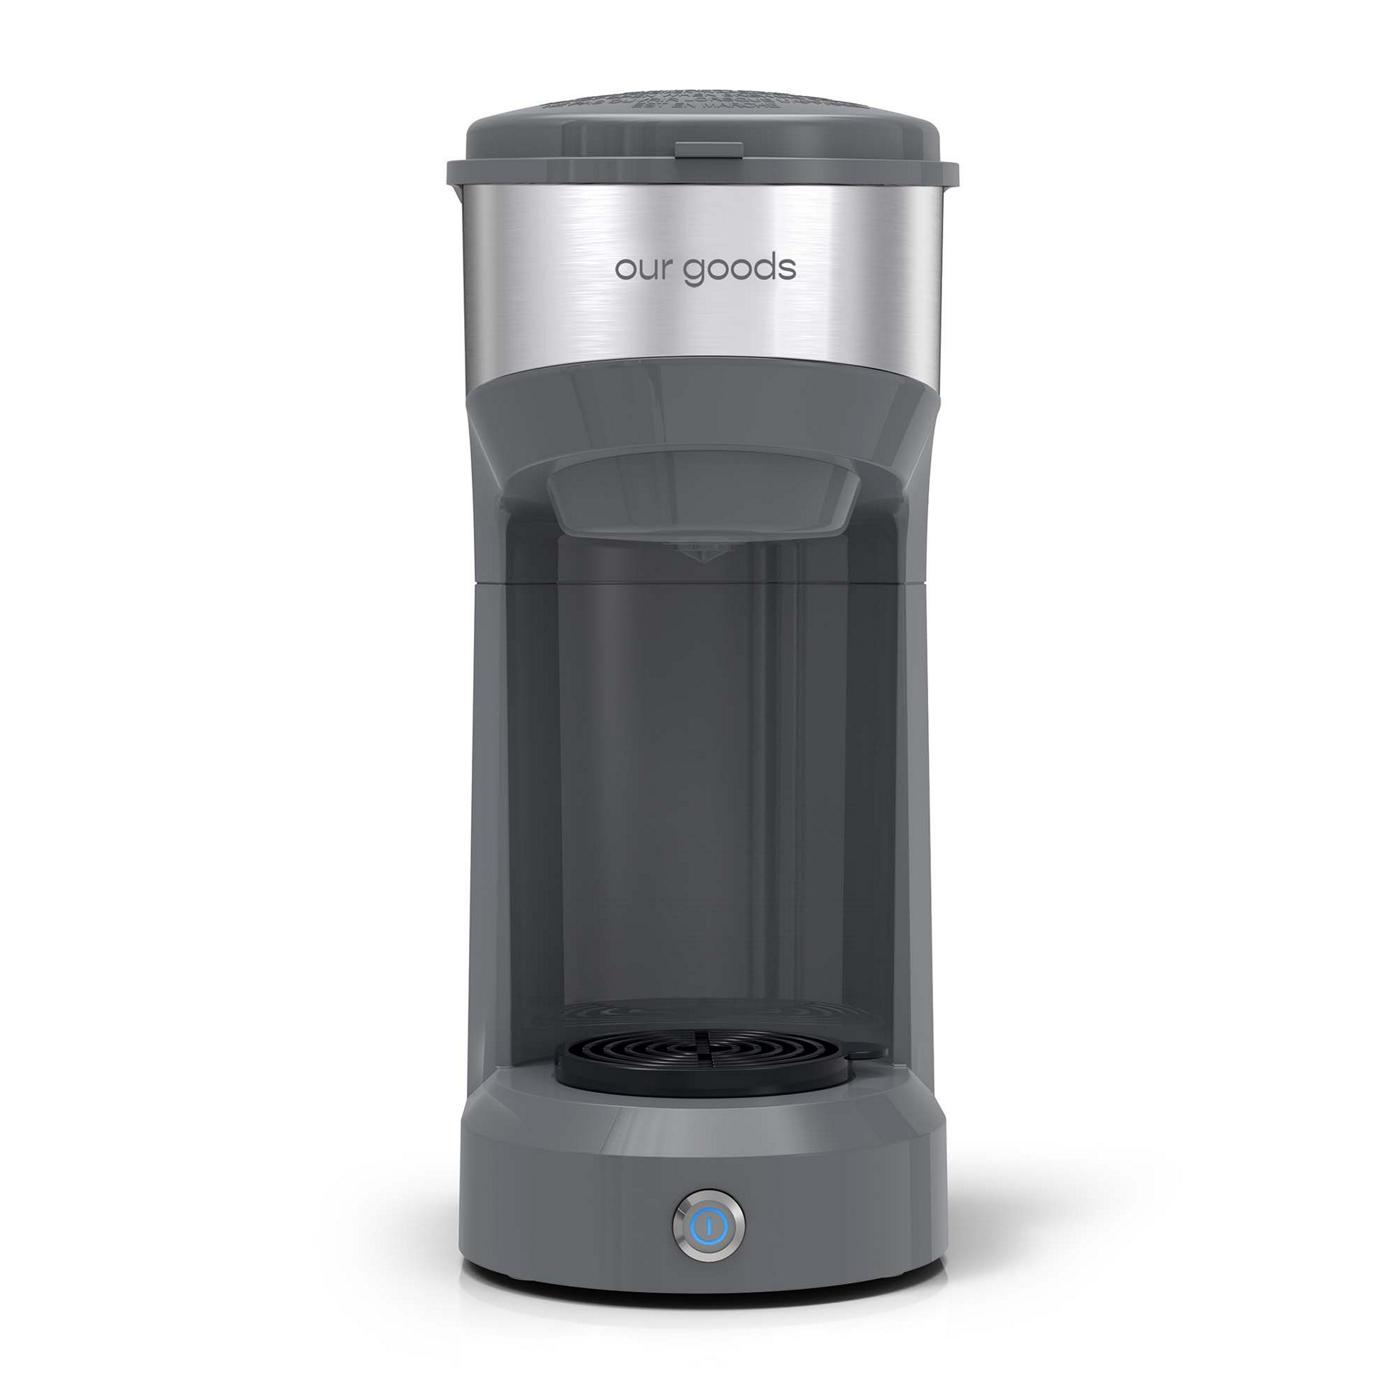 our goods Single Serve Coffee Maker - Pebble Gray; image 1 of 3